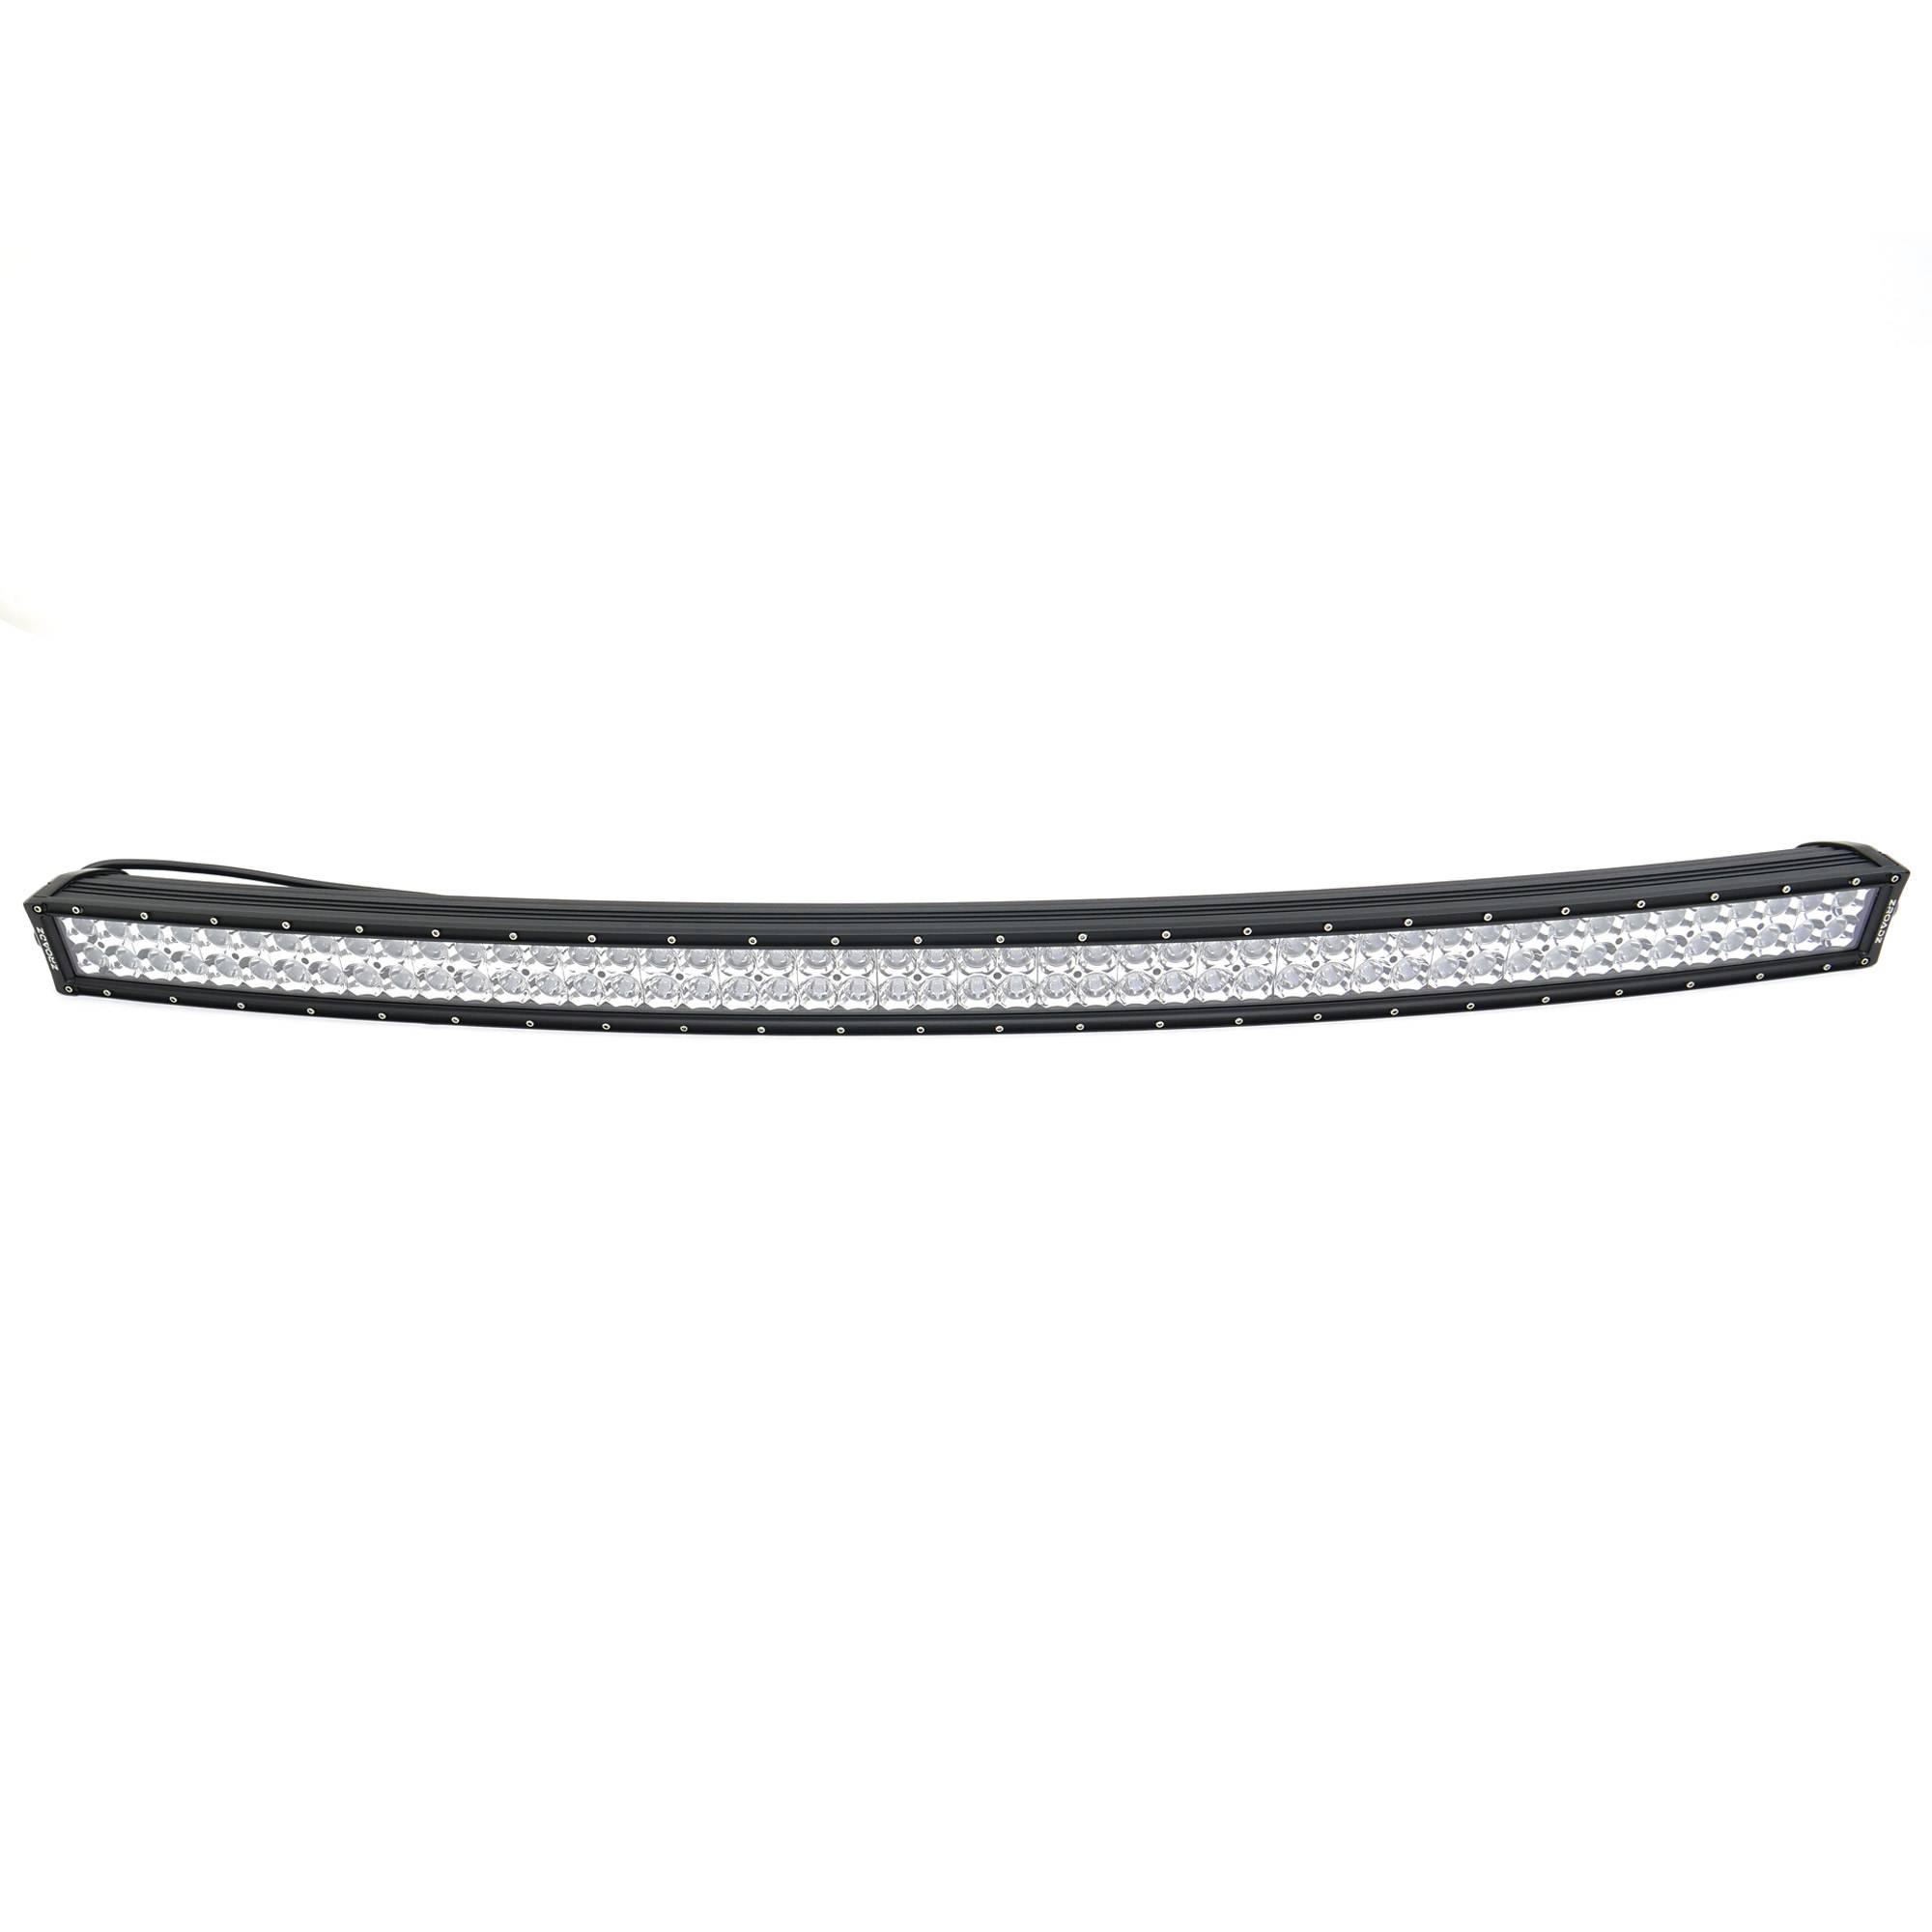 ZROADZ OFF ROAD PRODUCTS - 50 Inch LED Curved Double Row Light Bar - Part # Z30CBC14W288